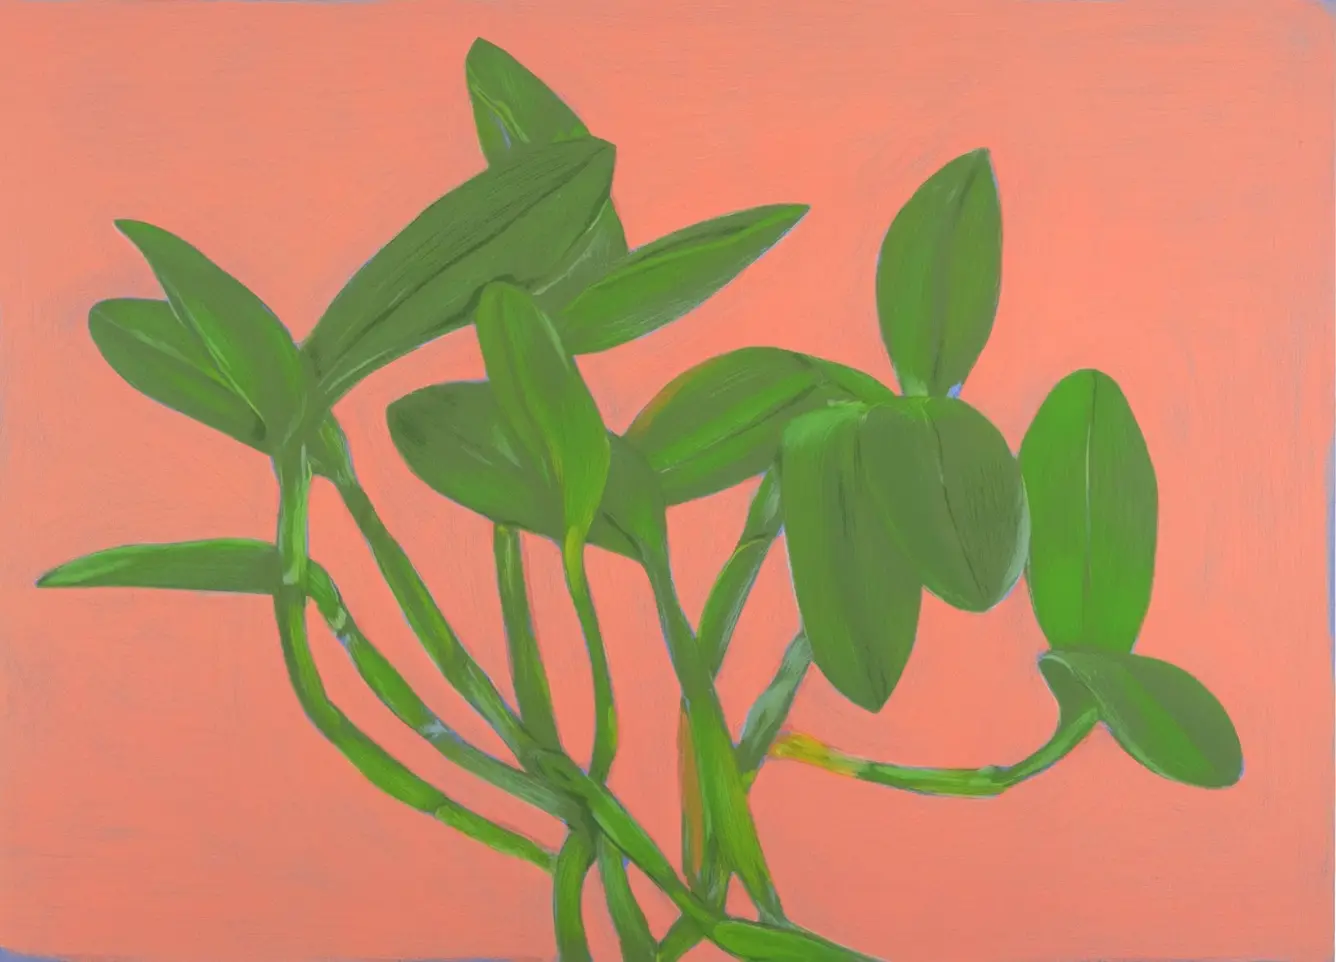 Green leaves on a peach background